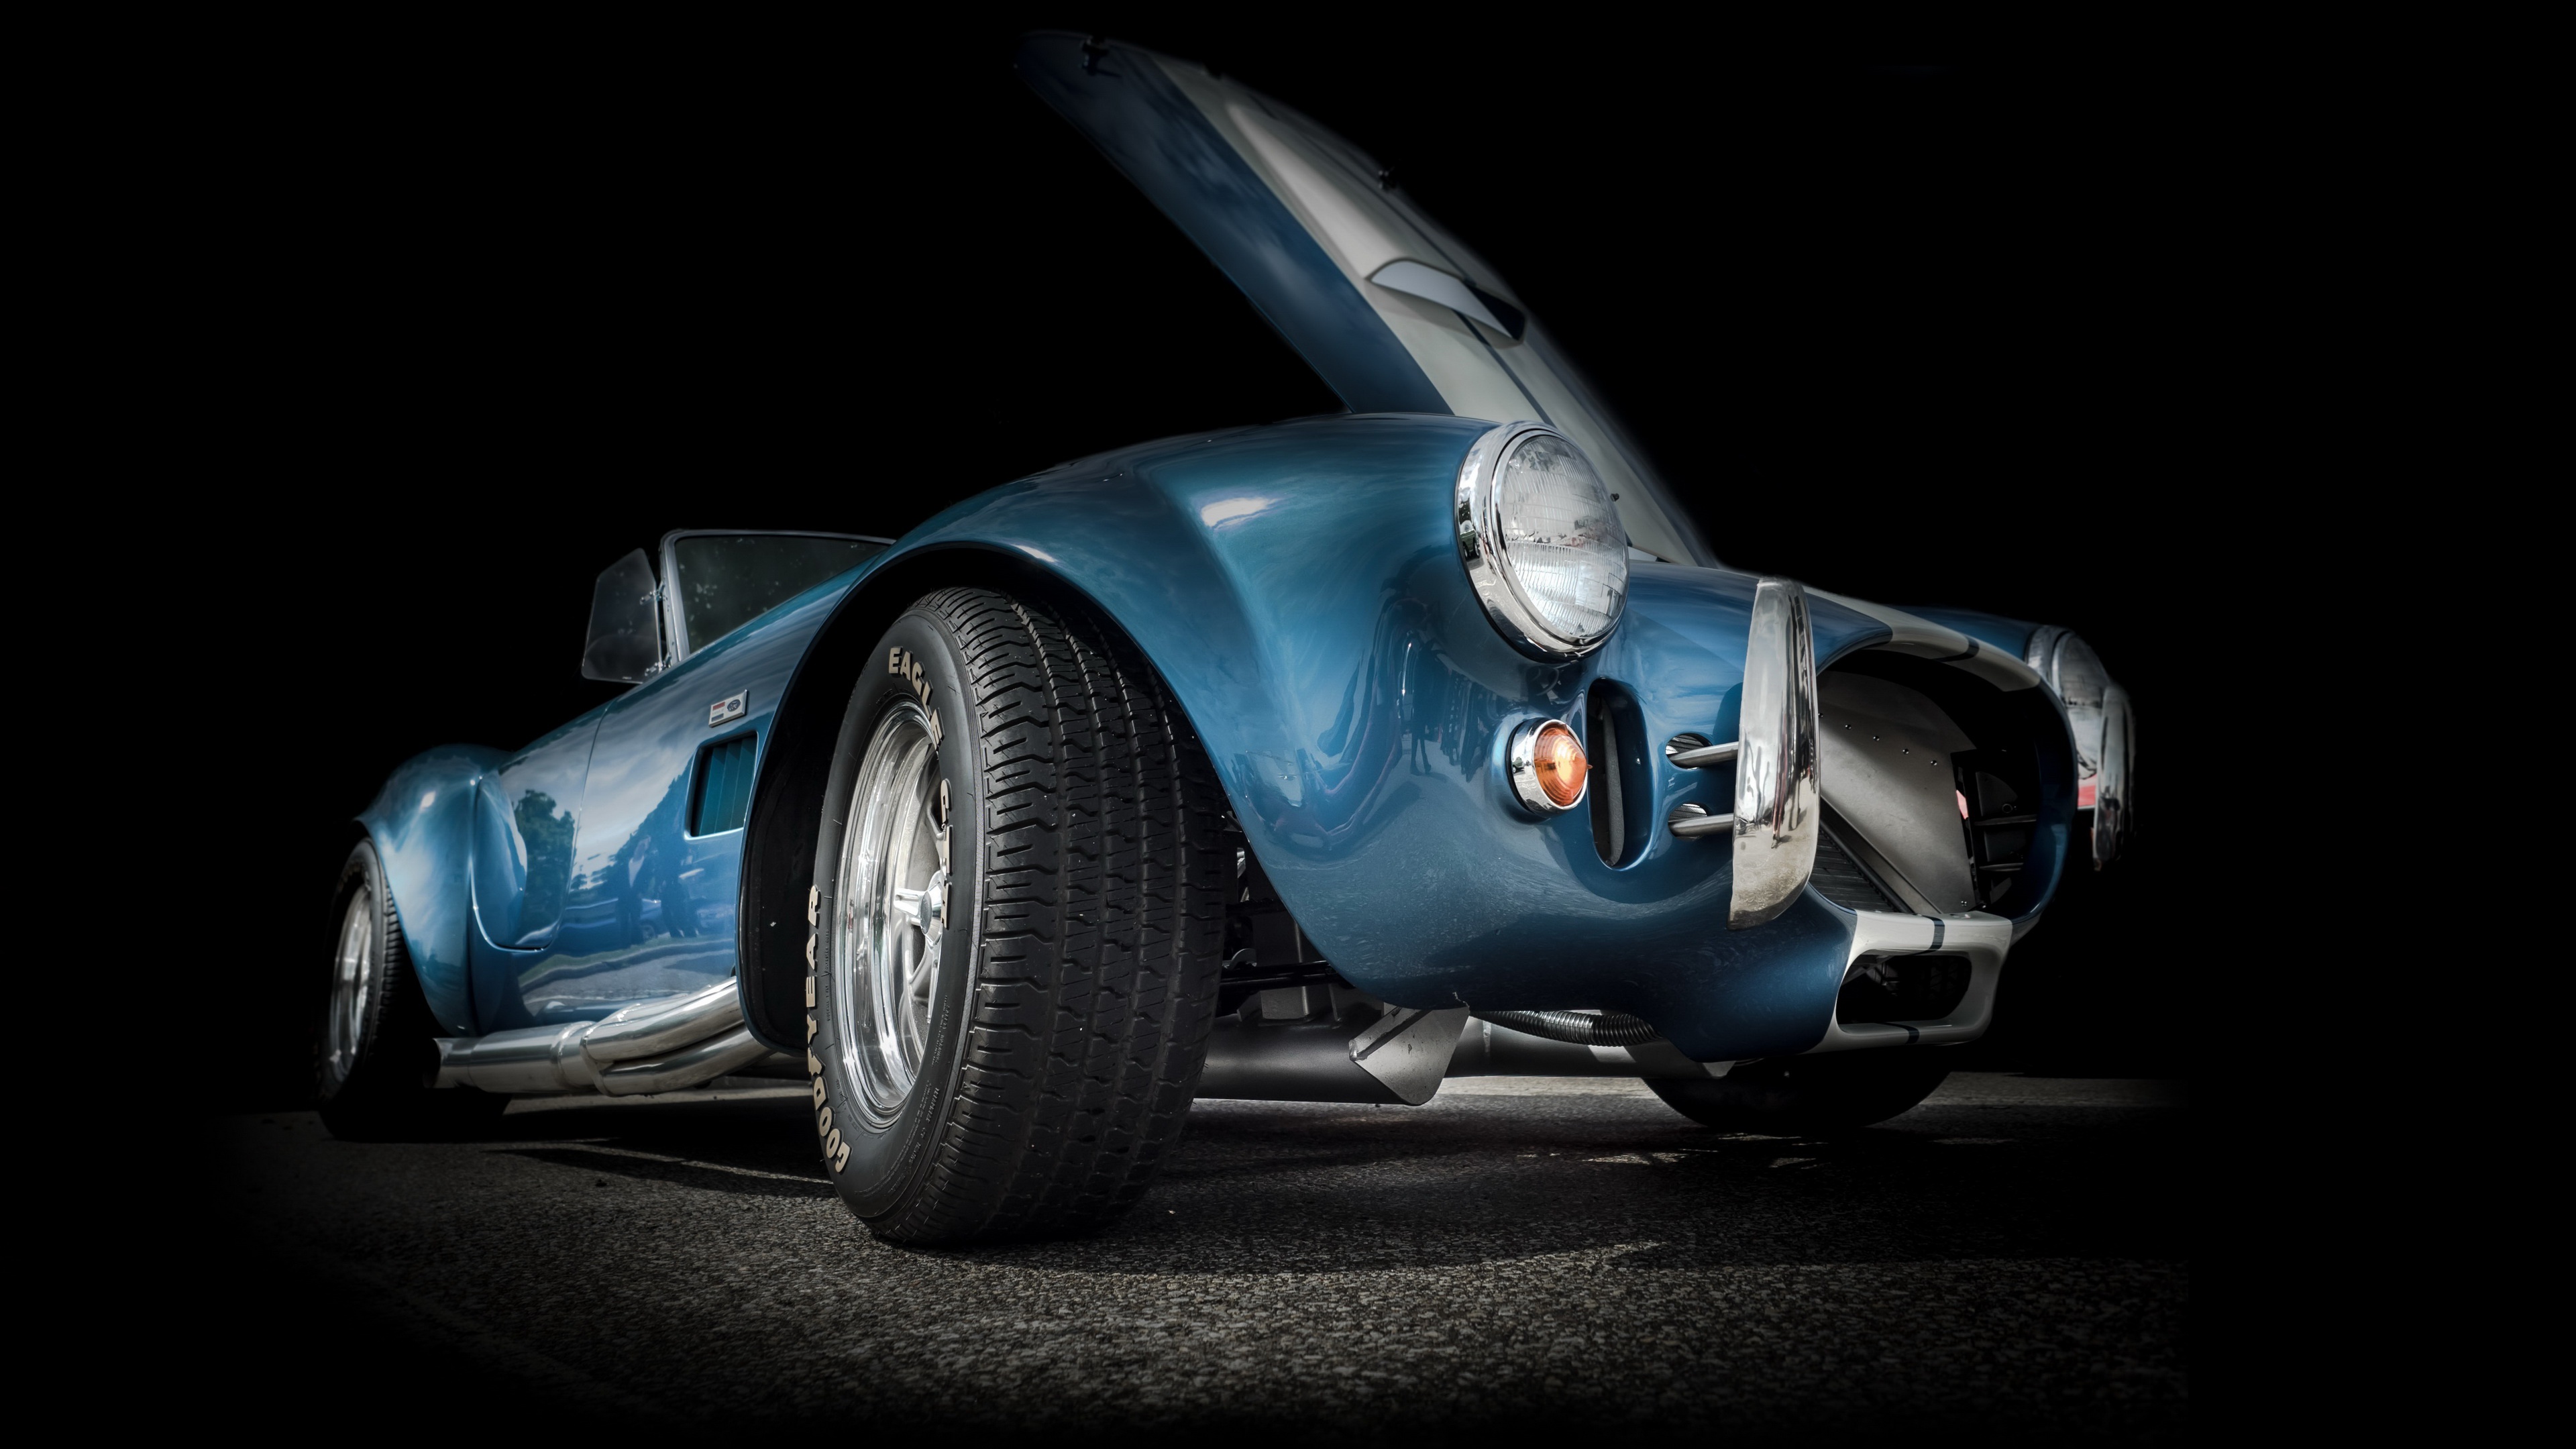 General 3840x2160 Shelby Cobra Shelby car vehicle blue cars